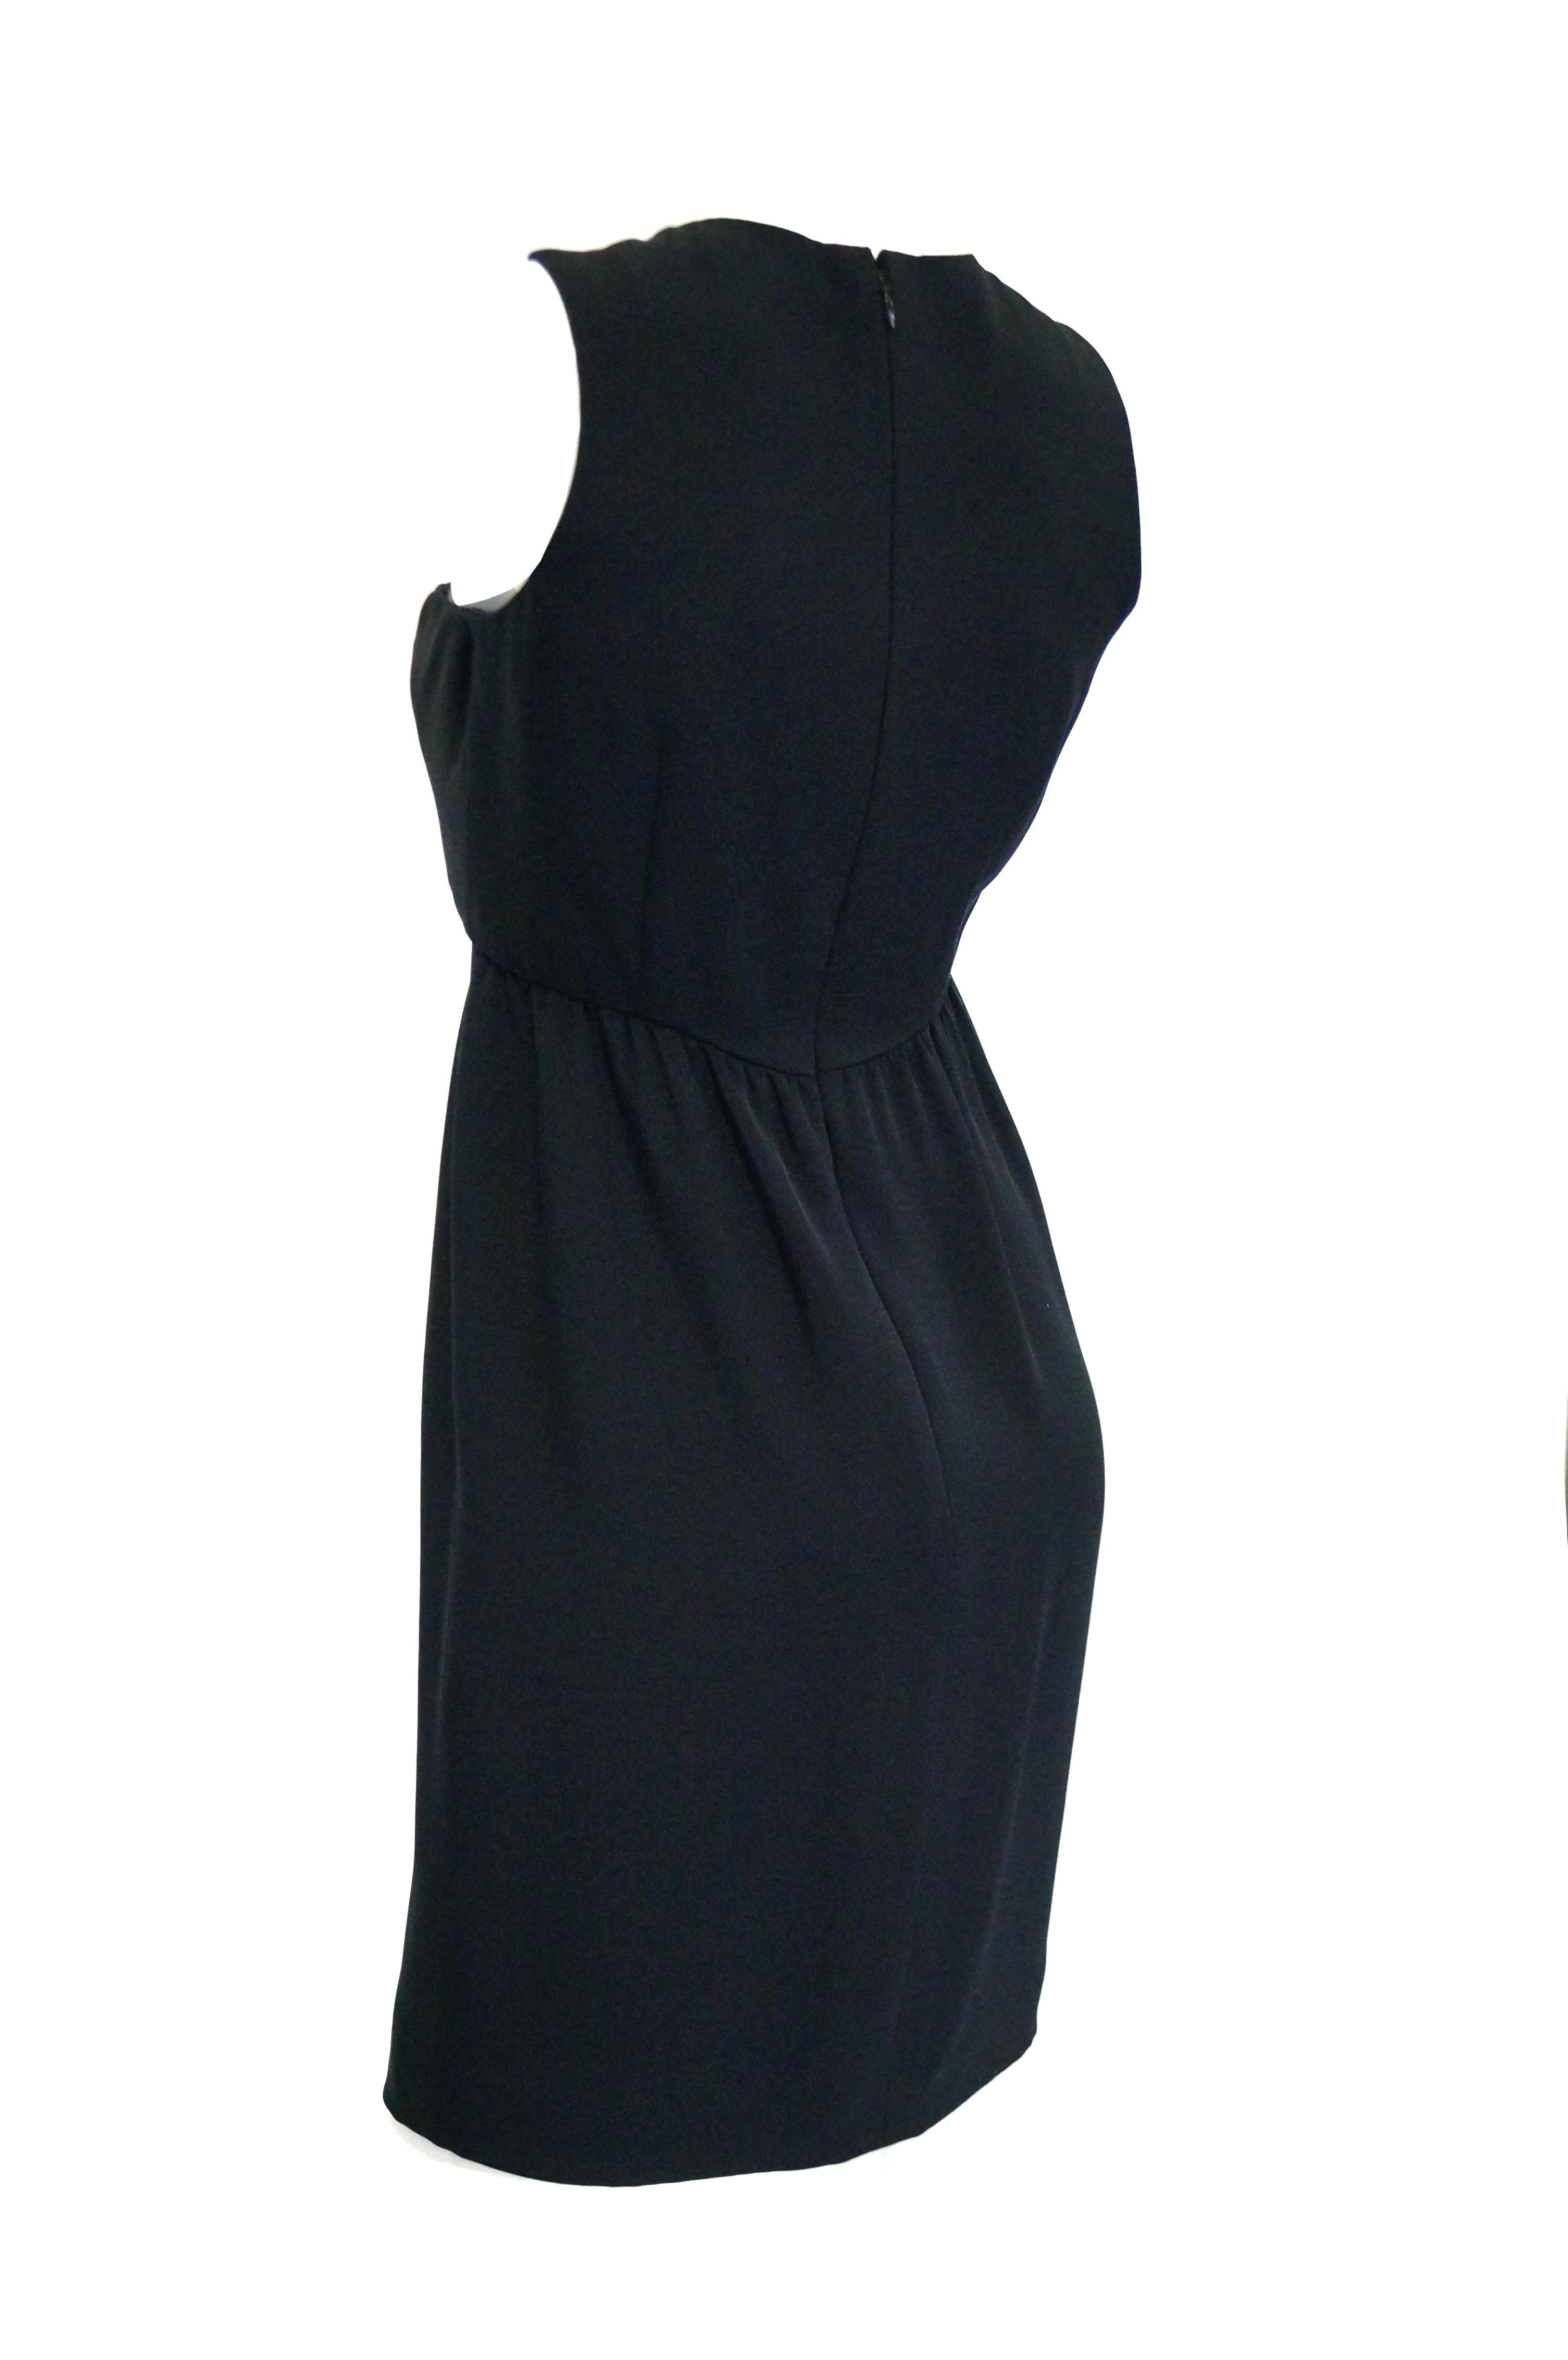 1970s Bill Blass Black Knot Front Cocktail Dress In Excellent Condition For Sale In Houston, TX